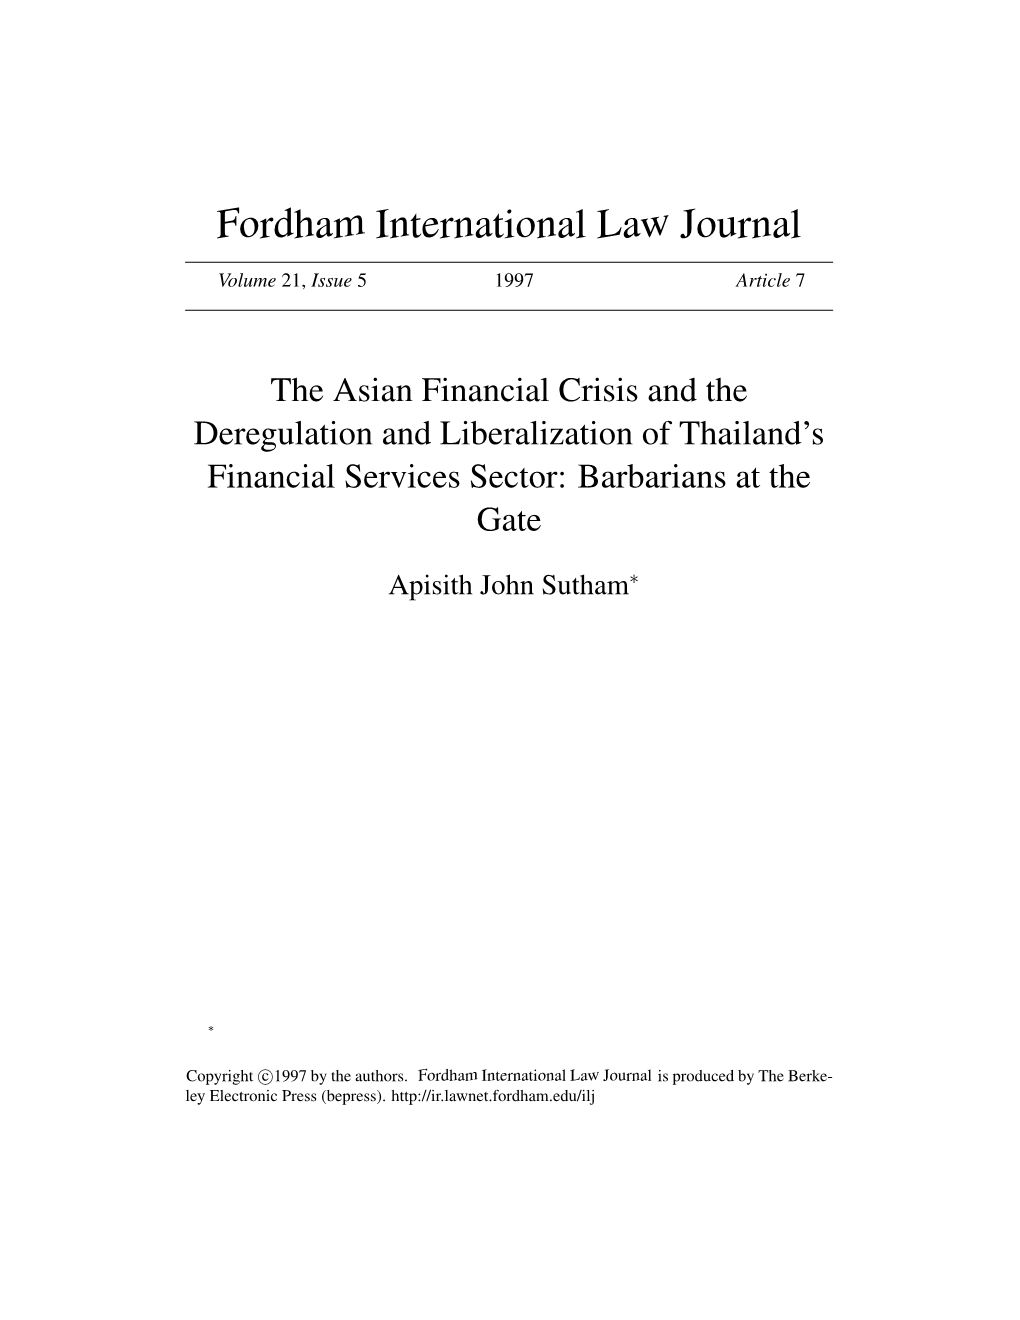 The Asian Financial Crisis and the Deregulation and Liberalization of Thailand’S Financial Services Sector: Barbarians at the Gate